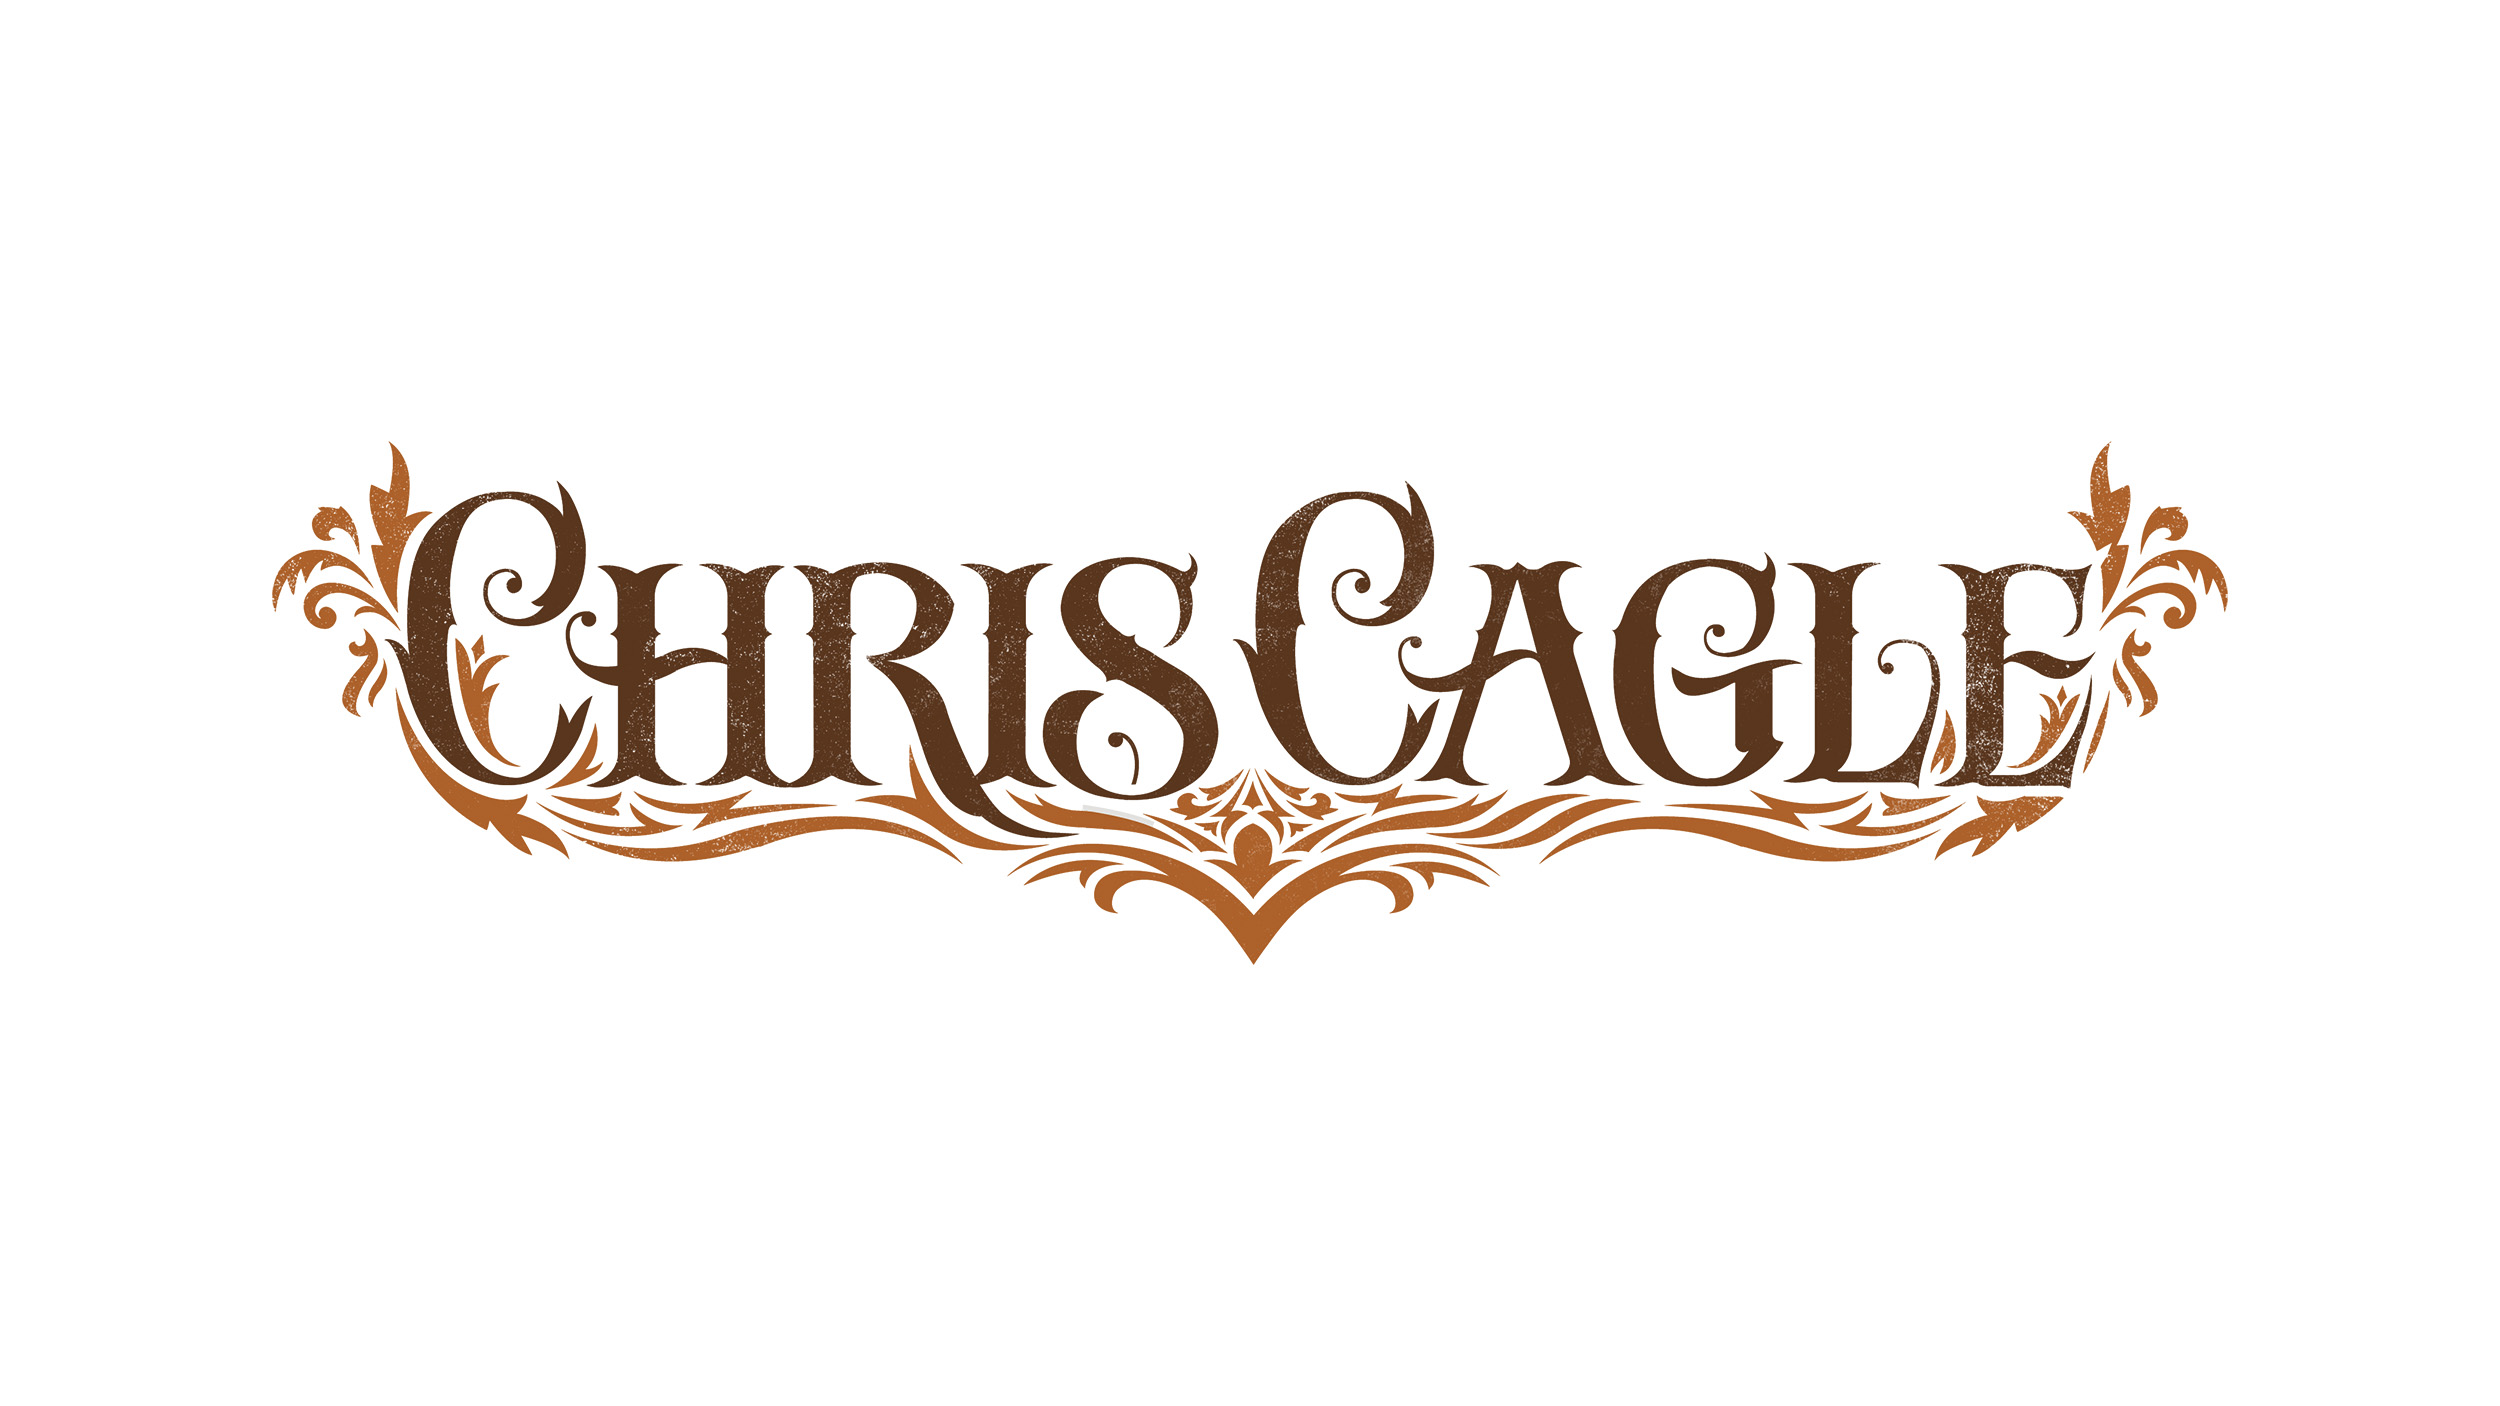 Logotype and wordmark for country music artist Chris Cagle.